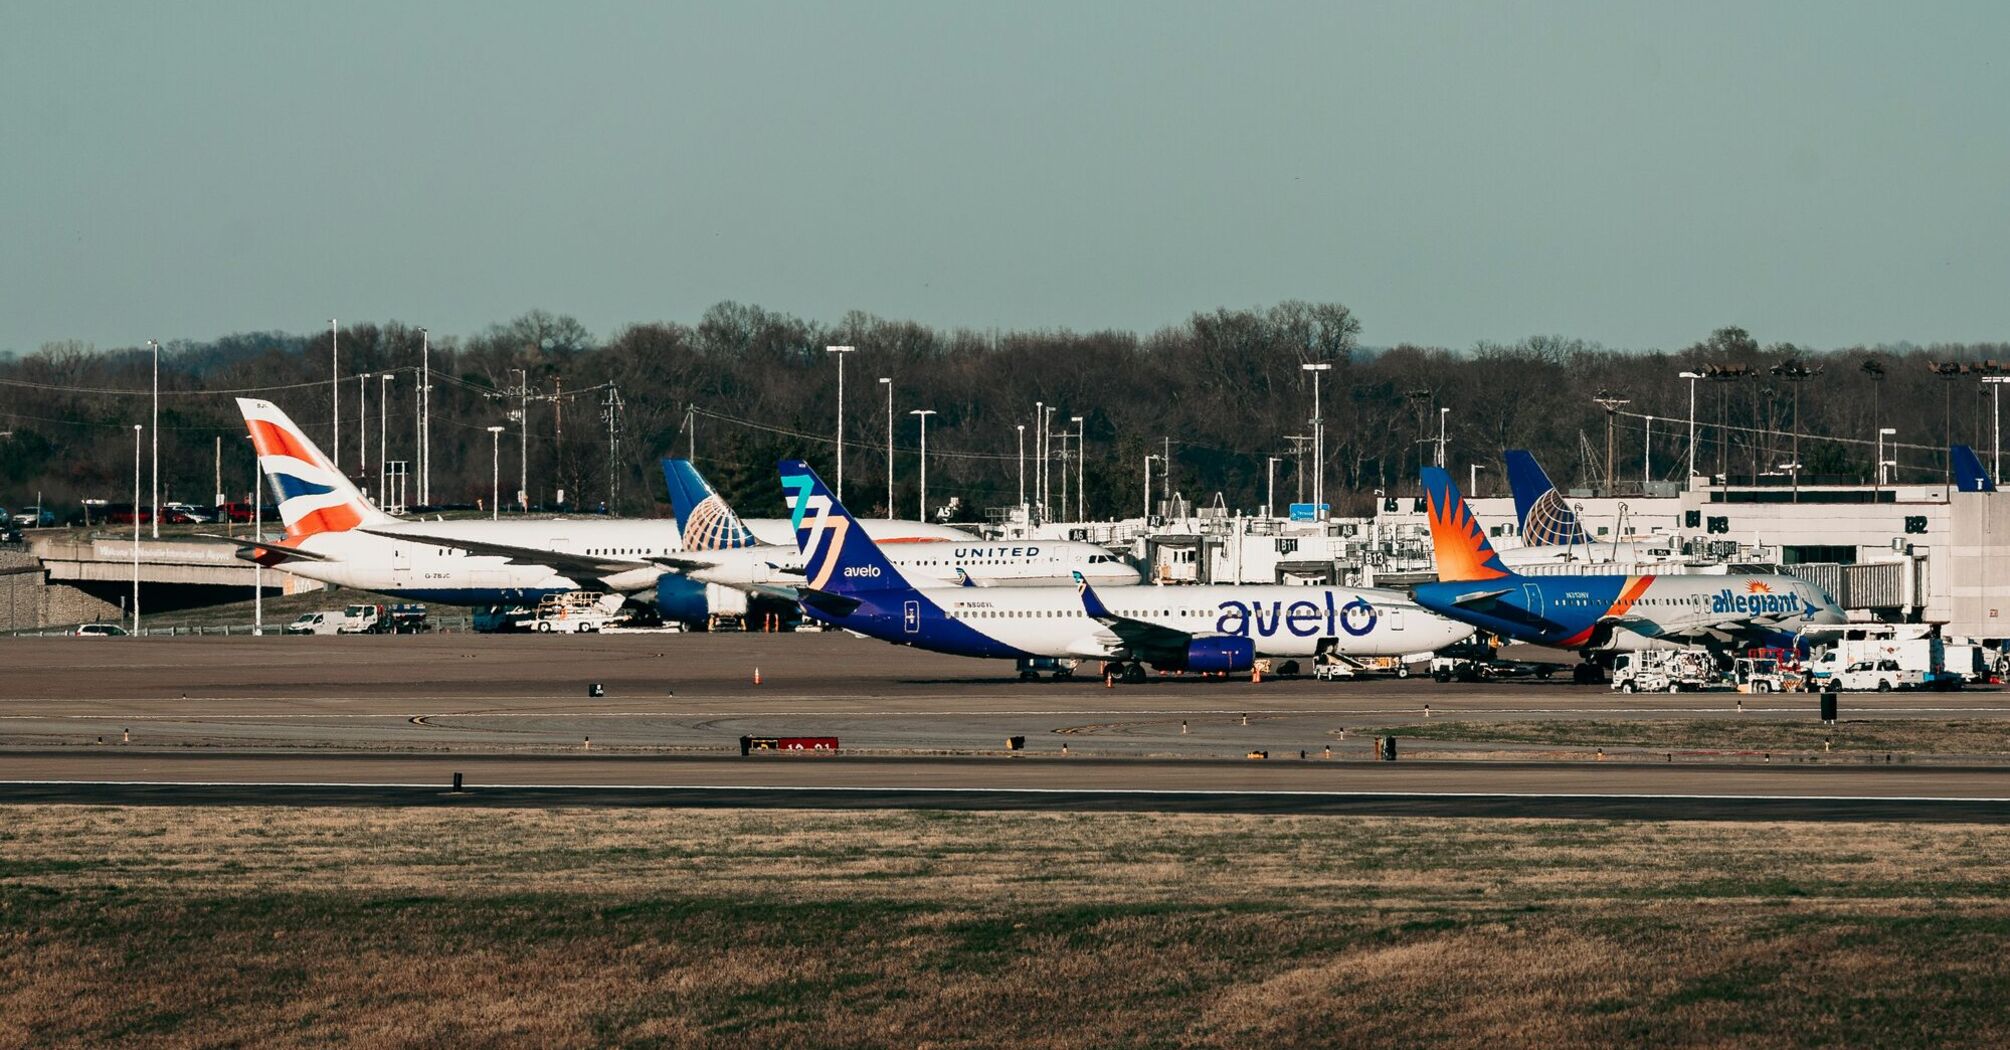 Several airplanes are parked on the runway at an airport